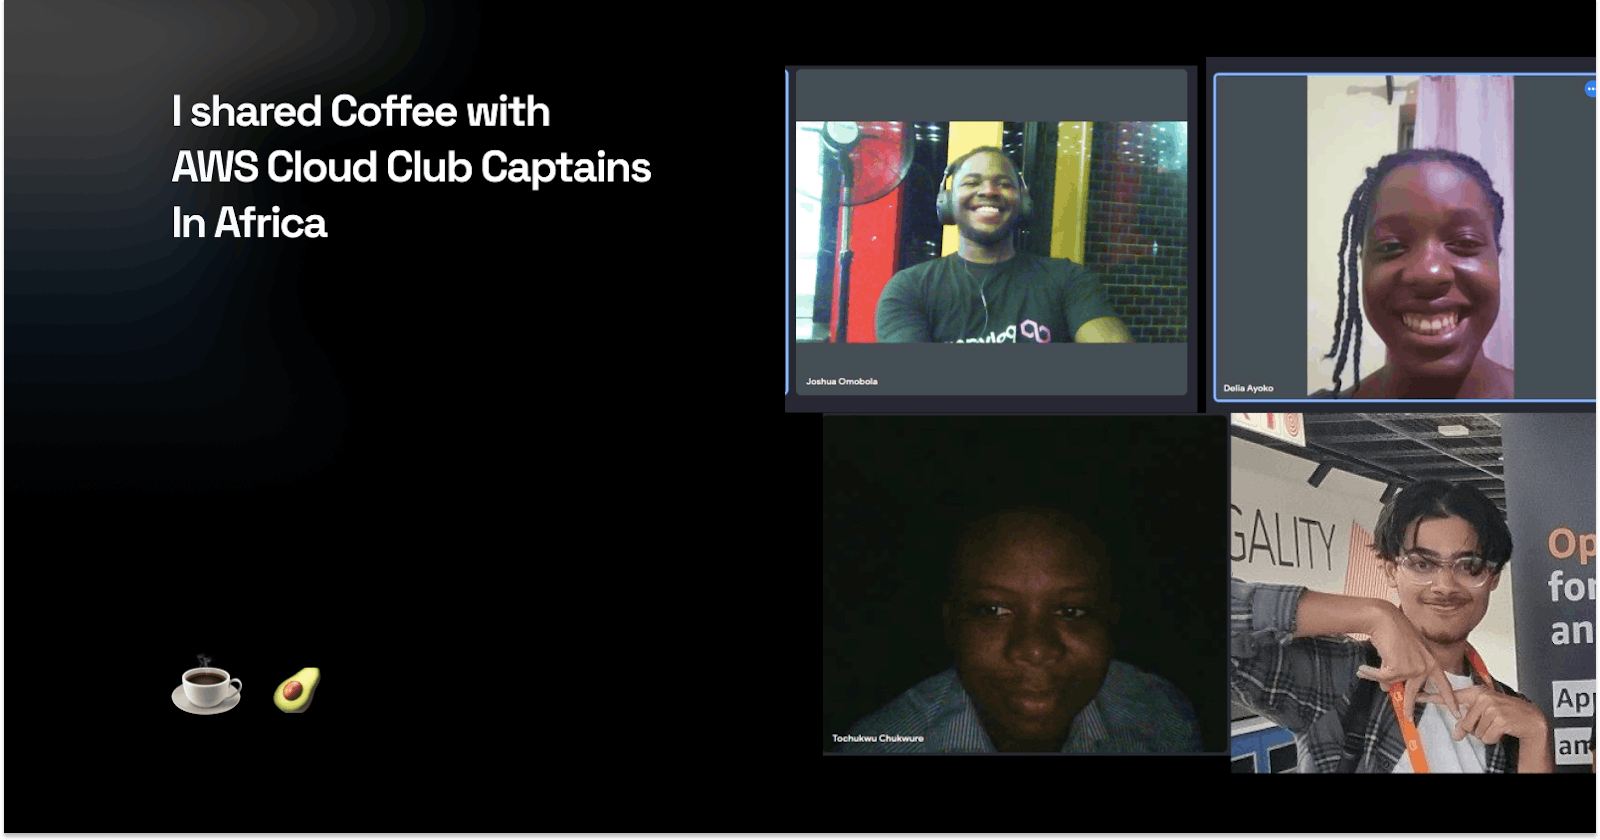 Coffee with AWS Cloud Club Captains in Africa